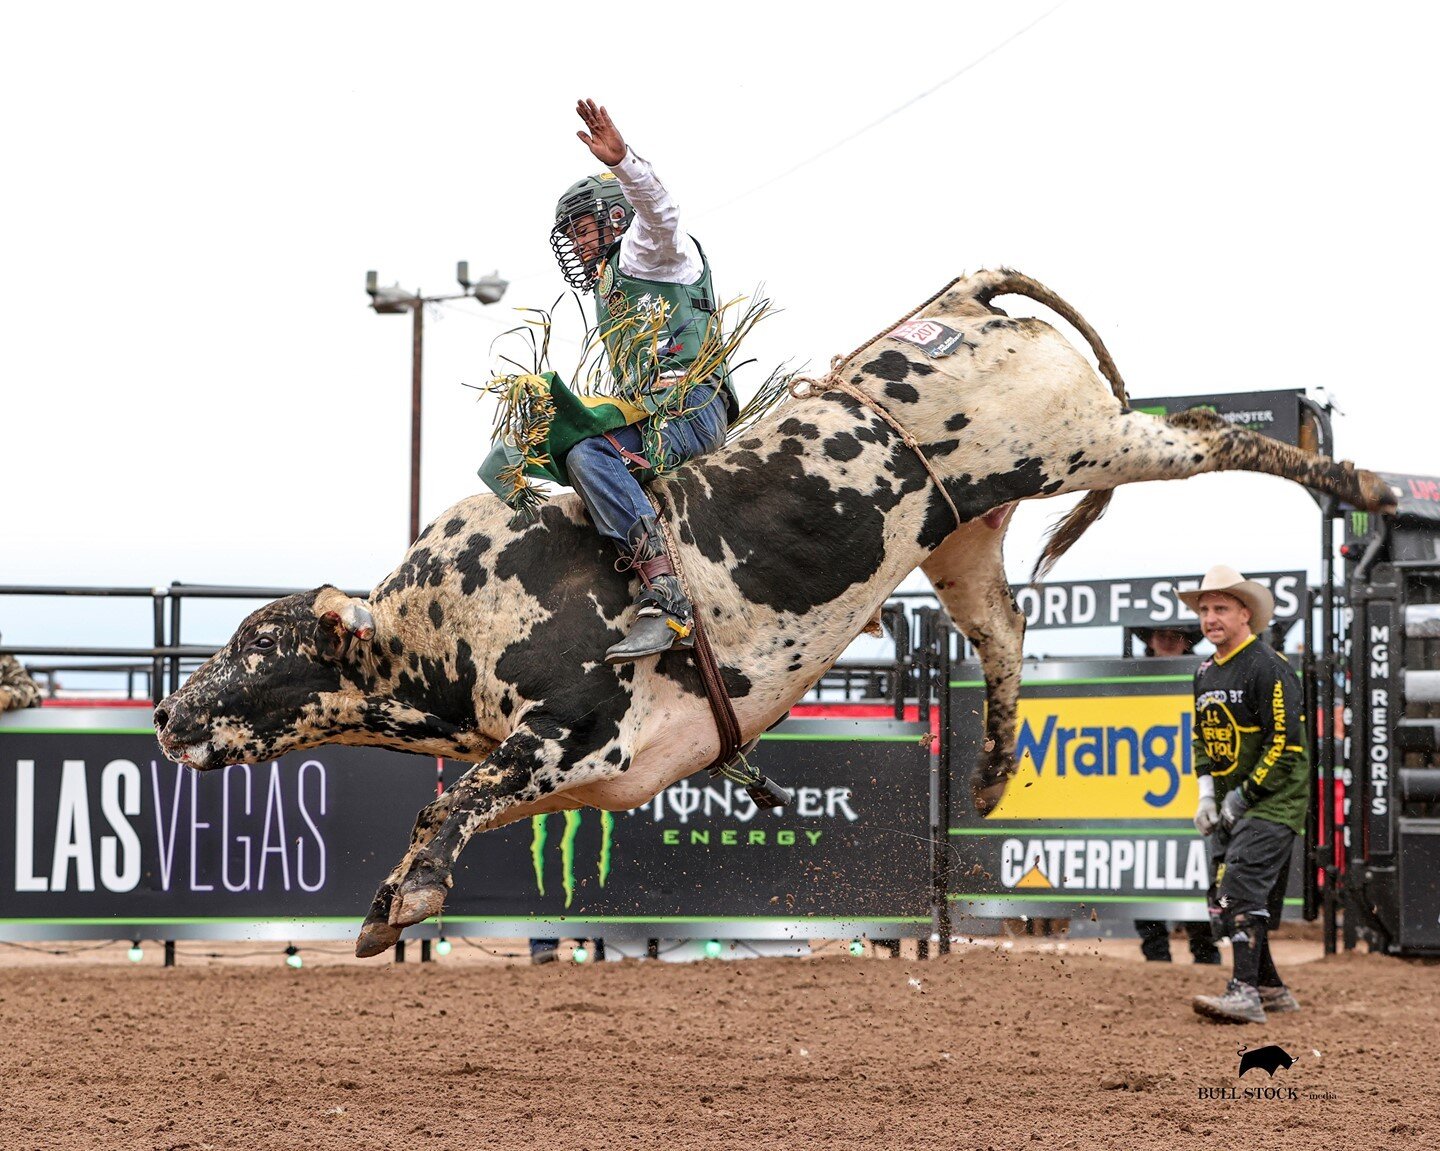 Simplicity is what I think of when looking at this photograph of @keyshawn_whitehorse. You never see a clean background at our Unleash the Beast PBR tour events, but the Del Rio event allowed a chance for a few. While signage and fans typically offer